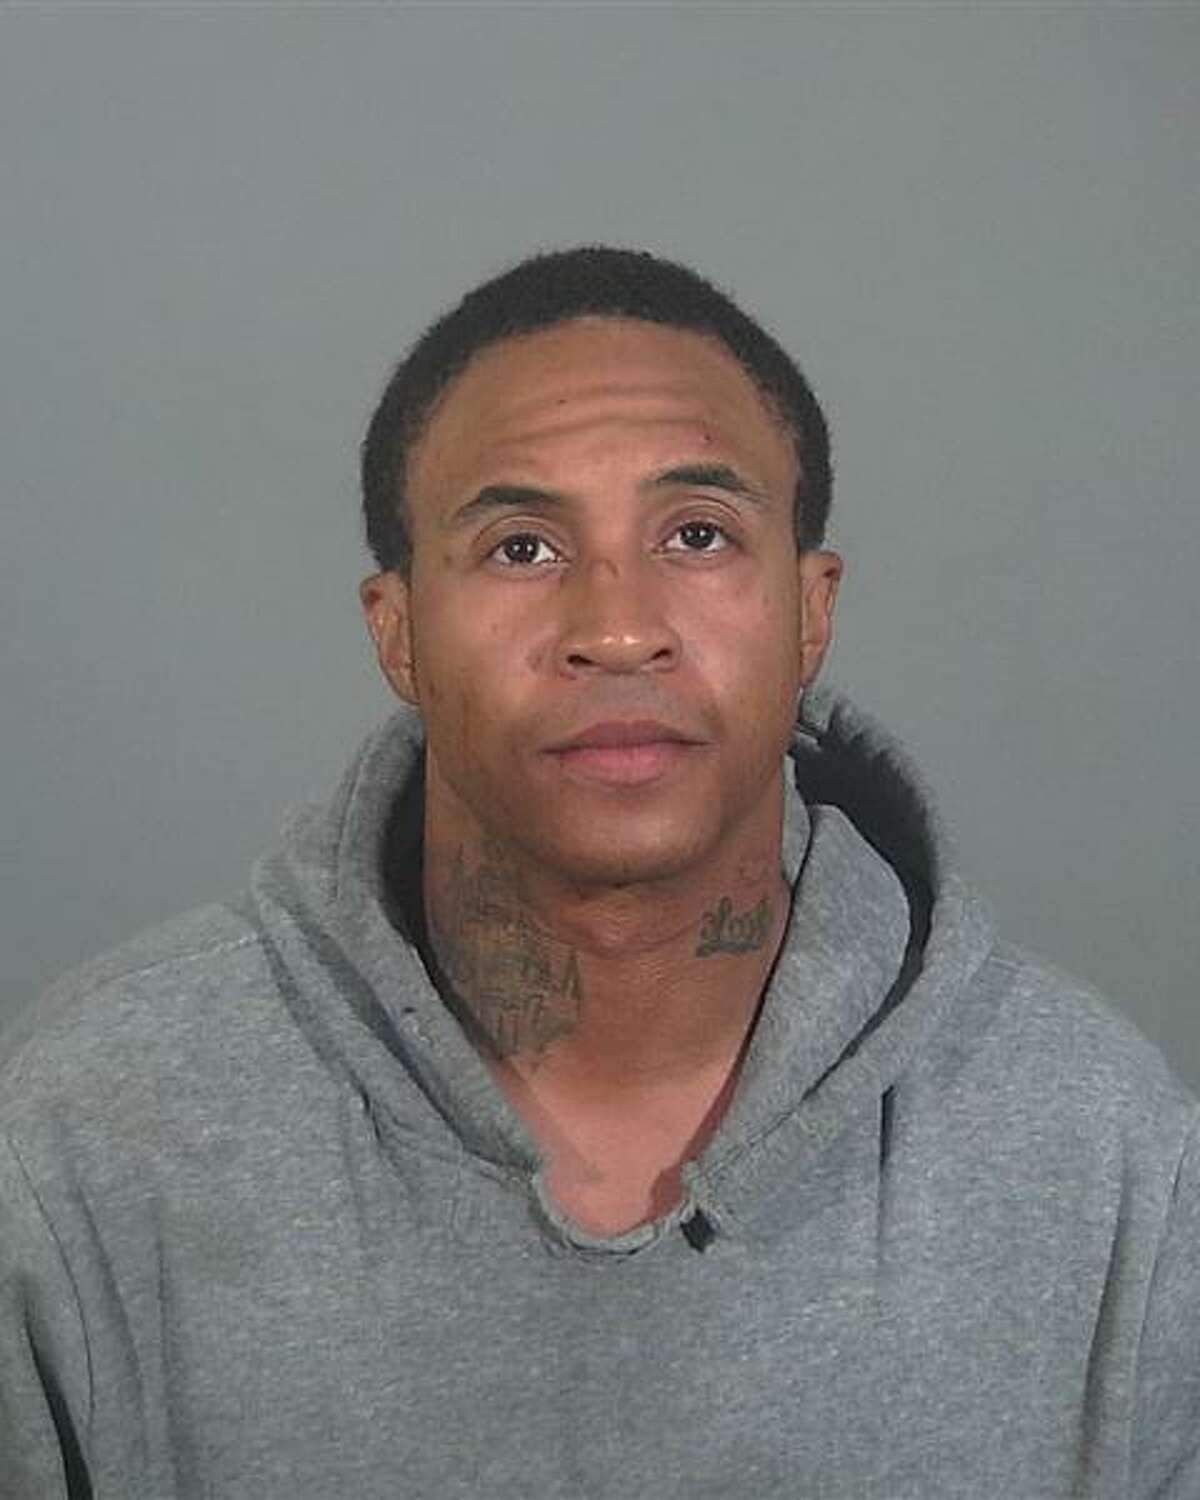 Orlando Brown, 28, known for his role on "That's So Raven" and "The Proud Family," was arrested in Torrance, California, on multiple charges in January.